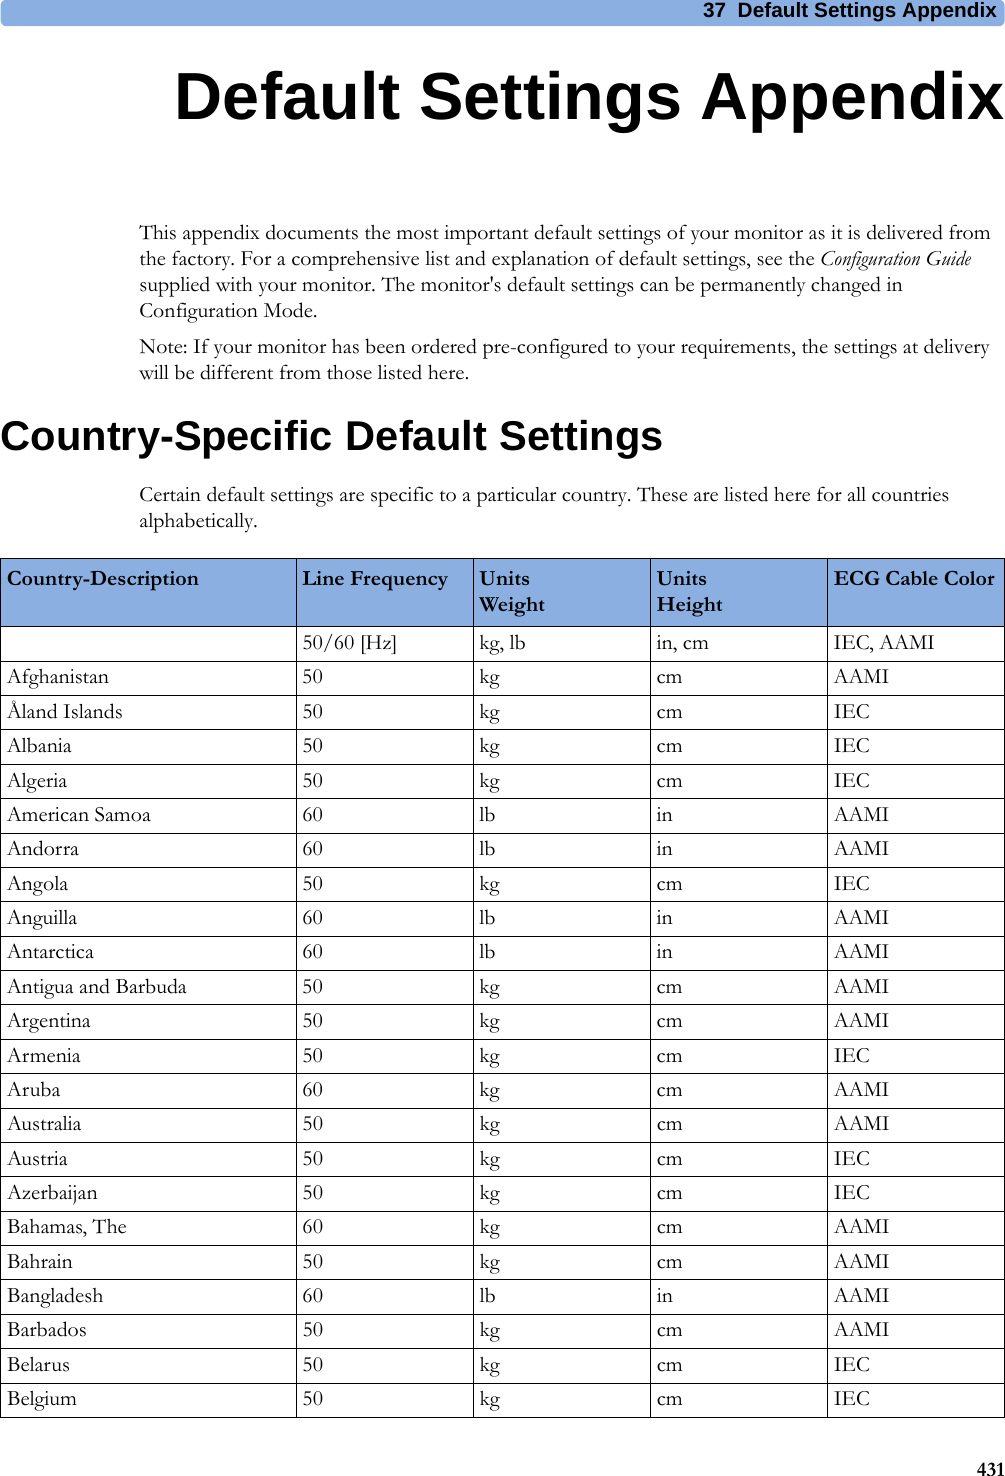 37 Default Settings Appendix43137Default Settings AppendixThis appendix documents the most important default settings of your monitor as it is delivered from the factory. For a comprehensive list and explanation of default settings, see the Configuration Guide supplied with your monitor. The monitor&apos;s default settings can be permanently changed in Configuration Mode.Note: If your monitor has been ordered pre-configured to your requirements, the settings at delivery will be different from those listed here.Country-Specific Default SettingsCertain default settings are specific to a particular country. These are listed here for all countries alphabetically.Country-Description Line Frequency UnitsWeightUnitsHeightECG Cable Color50/60 [Hz] kg, lb in, cm IEC, AAMIAfghanistan 50 kg cm AAMIÅland Islands 50 kg cm IECAlbania 50 kg cm IECAlgeria 50 kg cm IECAmerican Samoa 60 lb in AAMIAndorra 60 lb in AAMIAngola 50 kg cm IECAnguilla 60 lb in AAMIAntarctica 60 lb in AAMIAntigua and Barbuda 50 kg cm AAMIArgentina 50 kg cm AAMIArmenia 50 kg cm IECAruba 60 kg cm AAMIAustralia 50 kg cm AAMIAustria 50 kg cm IECAzerbaijan 50 kg cm IECBahamas, The 60 kg cm AAMIBahrain 50 kg cm AAMIBangladesh 60 lb in AAMIBarbados 50 kg cm AAMIBelarus 50 kg cm IECBelgium 50 kg cm IEC